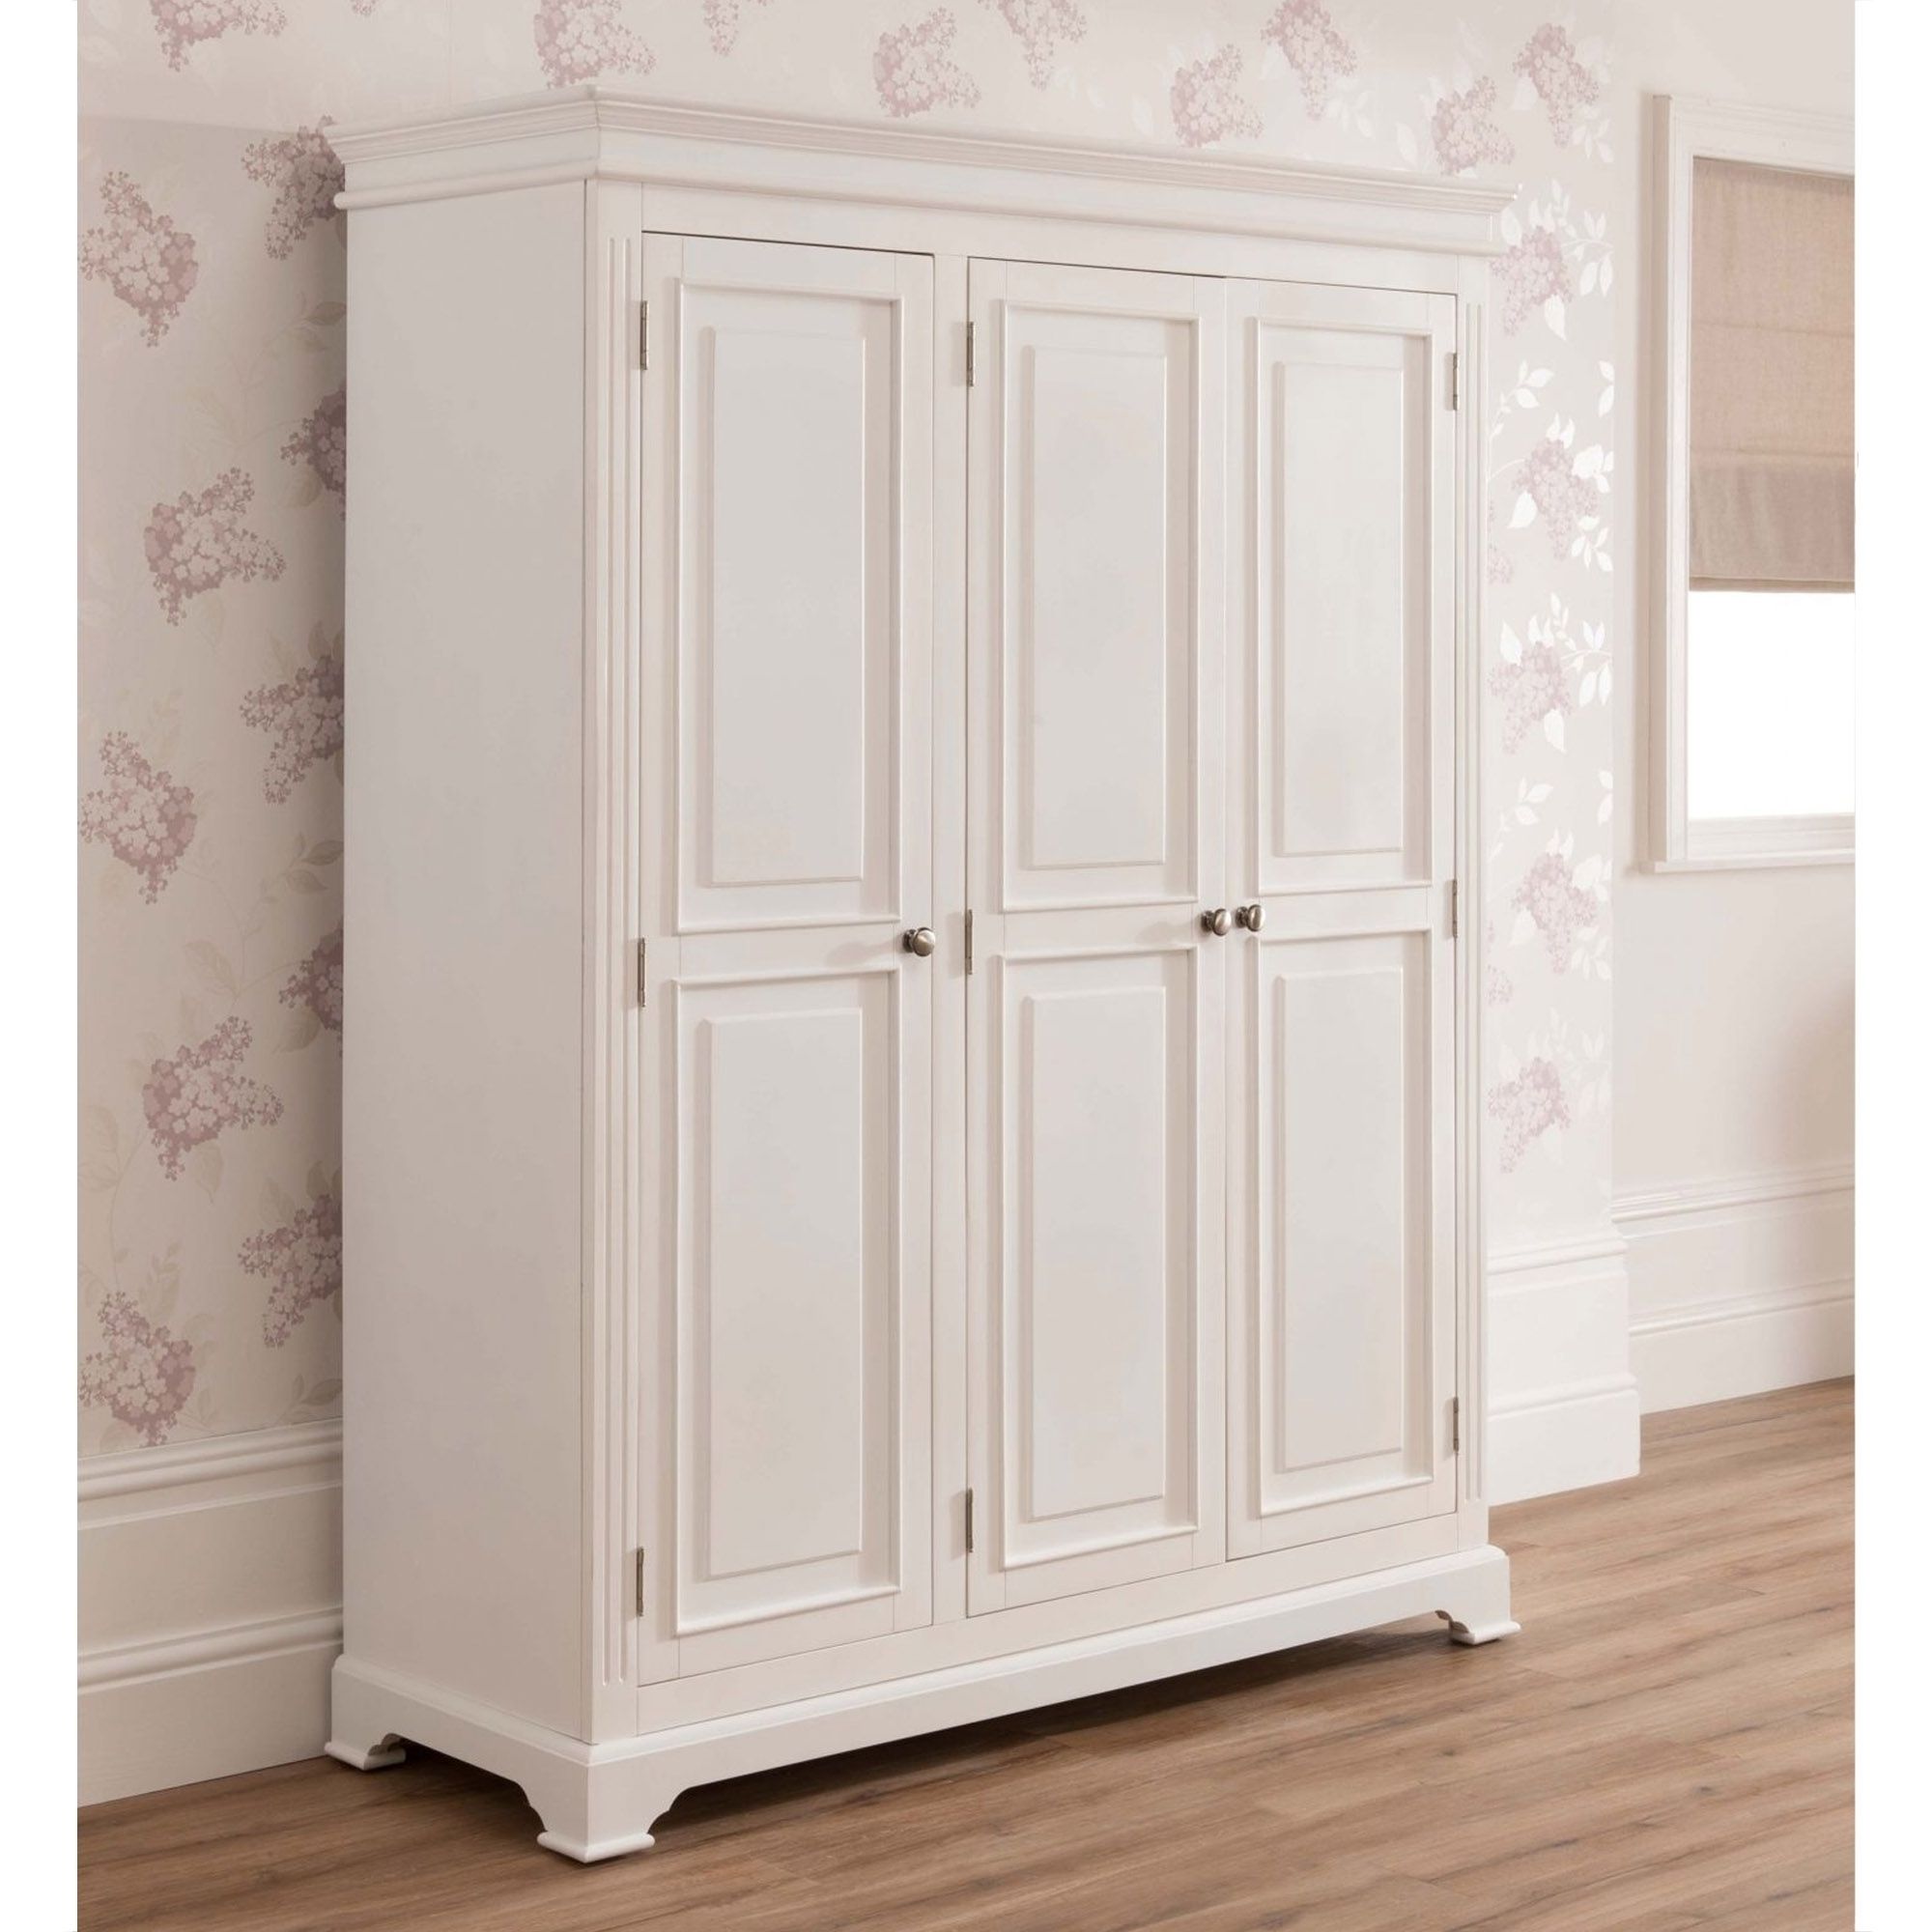 Trendy Sophia Shabby Chic Wardrobe Is A Fantastic Addition To Our Antique In Shabby Chic Wardrobes (View 1 of 15)